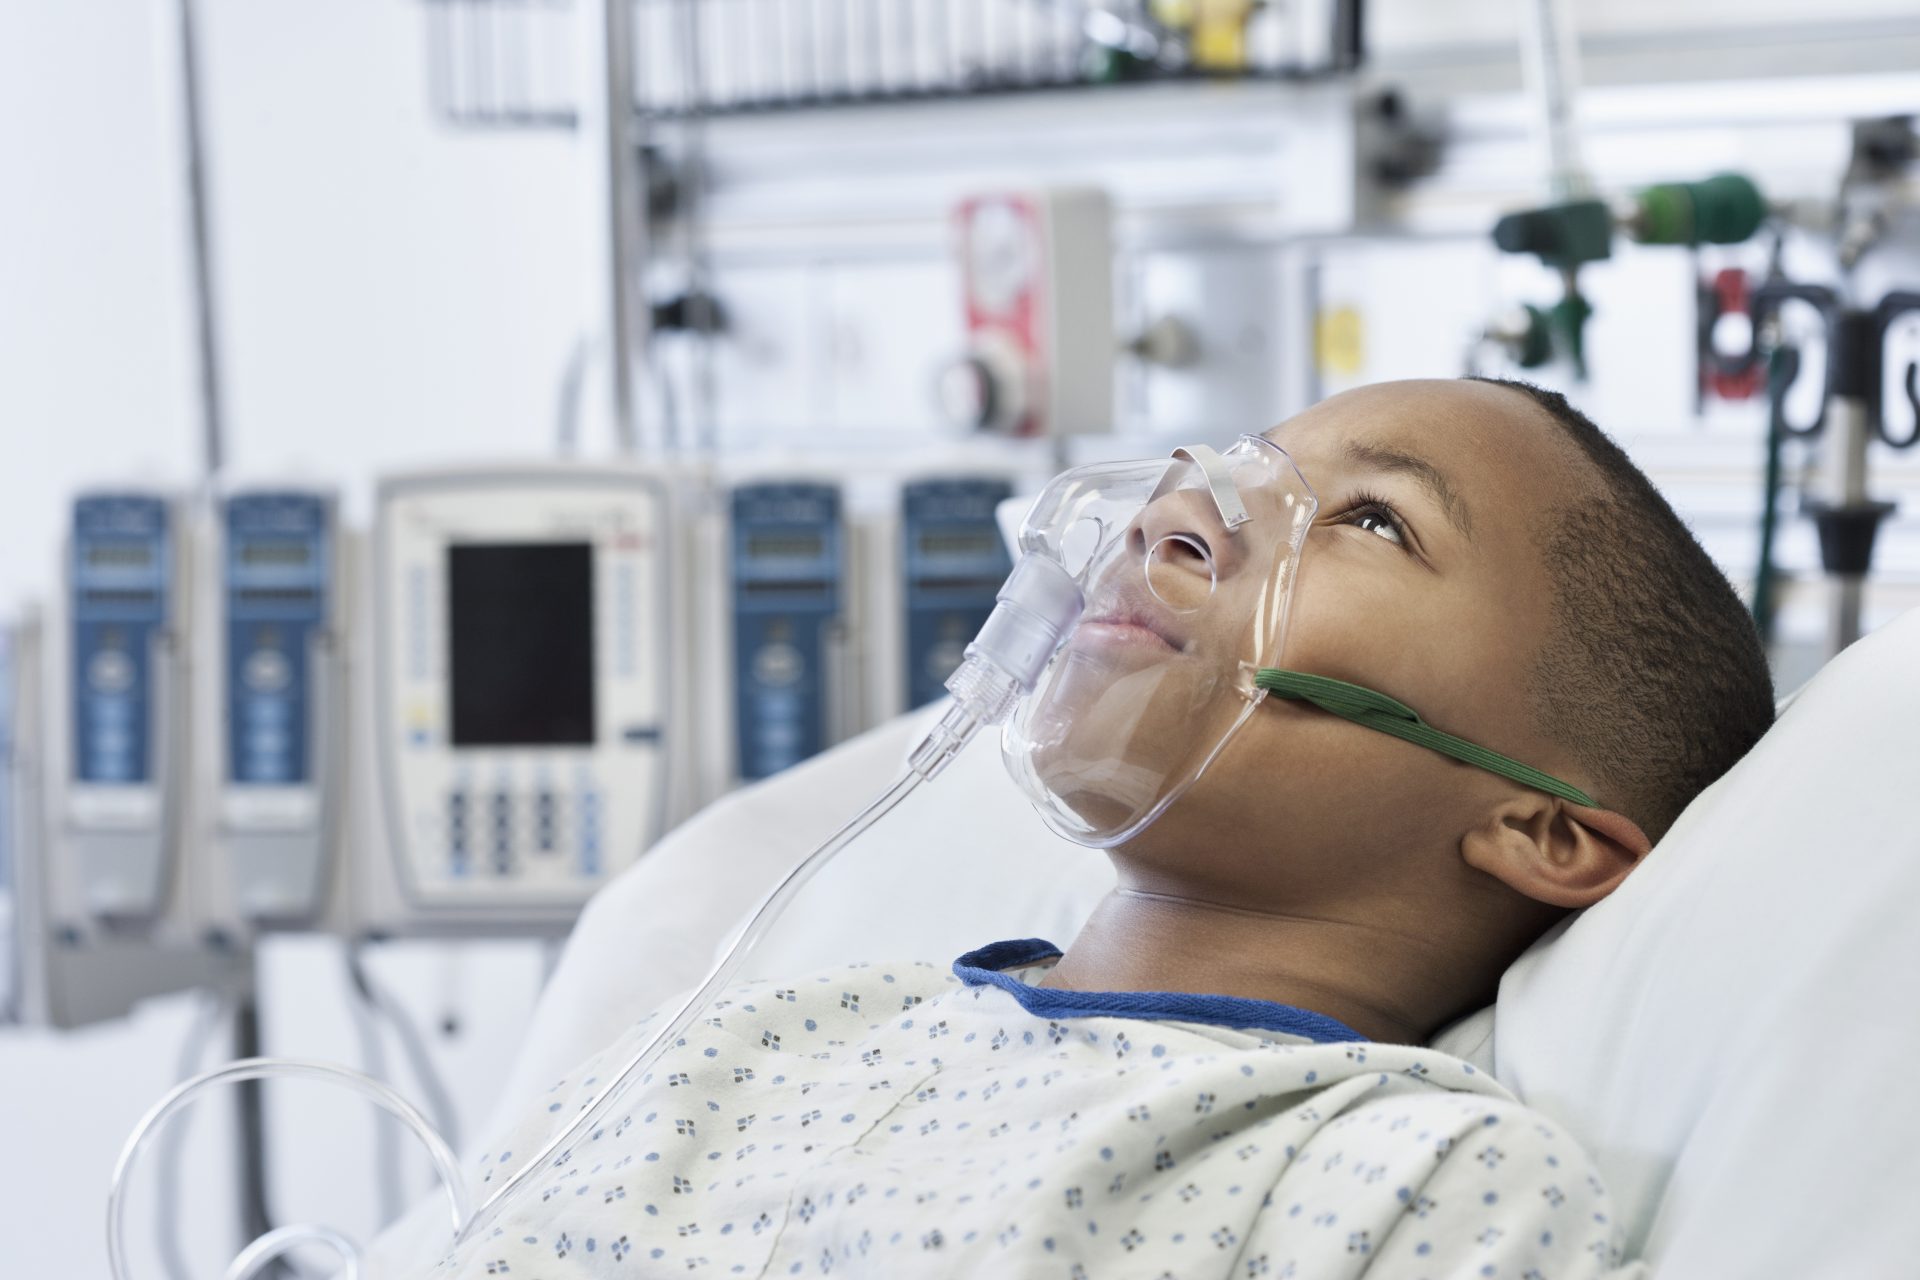 Children of color face major healthcare inequalities study finds